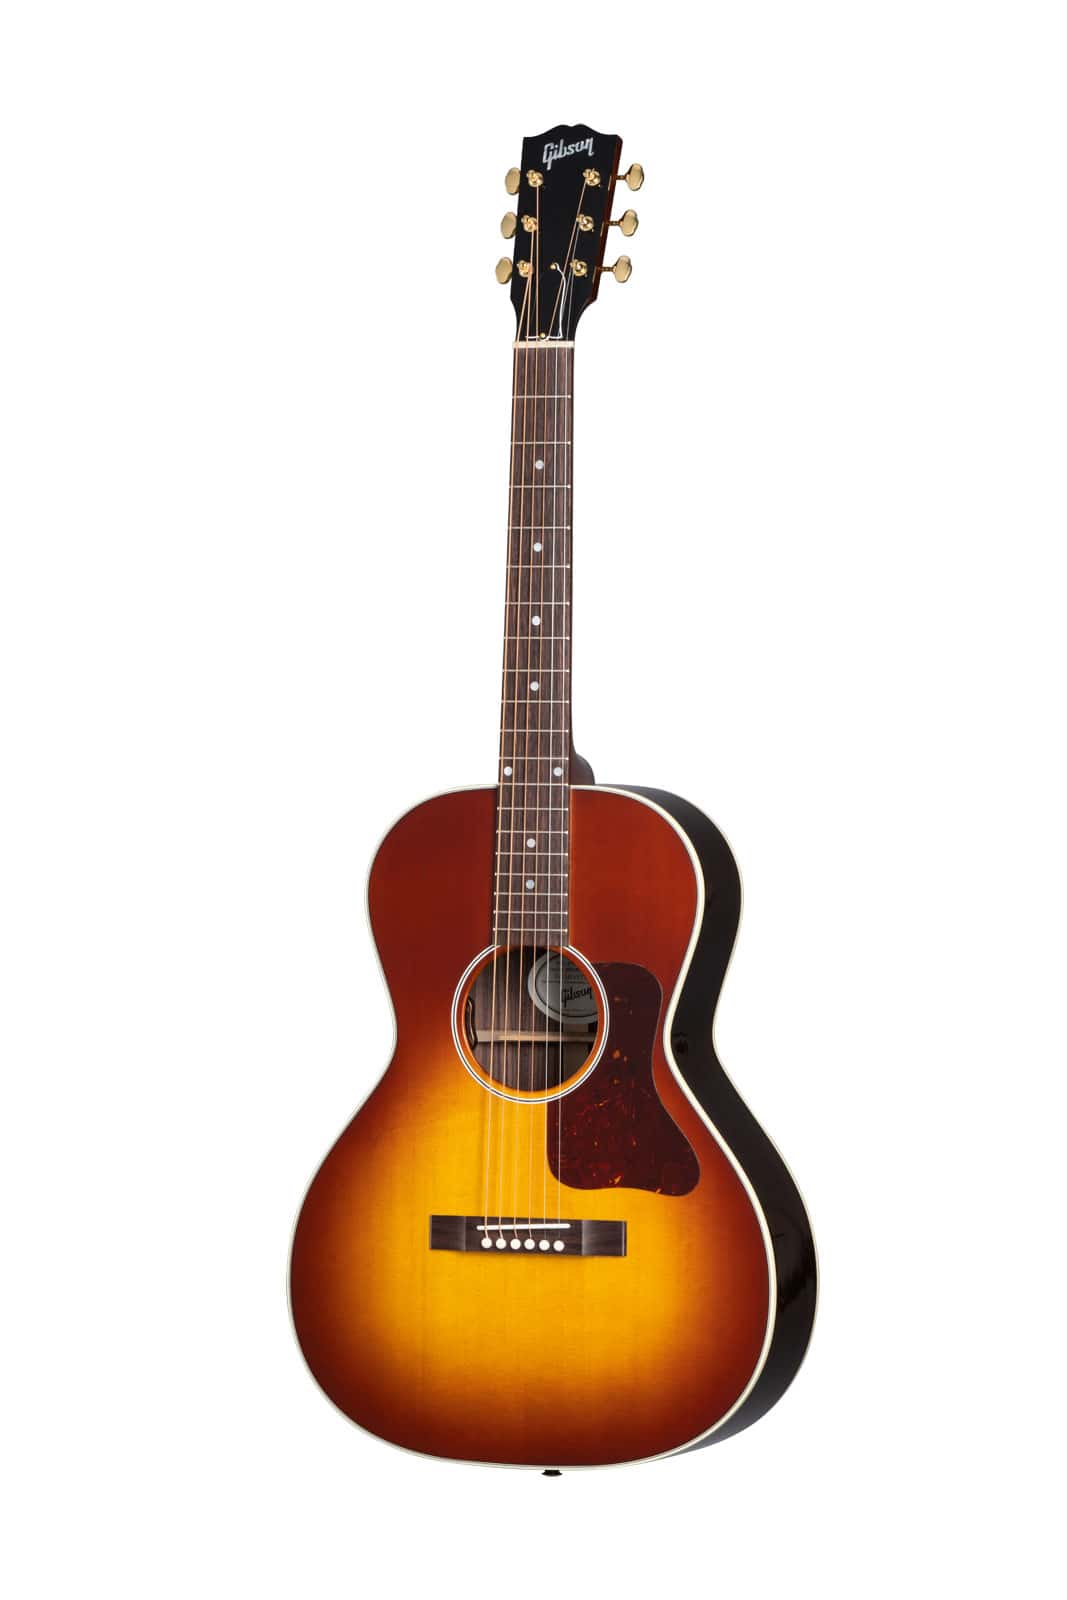 GIBSON ACOUSTIC L-00 ROSEWOOD 12-FRET ROSEWOOD BURST